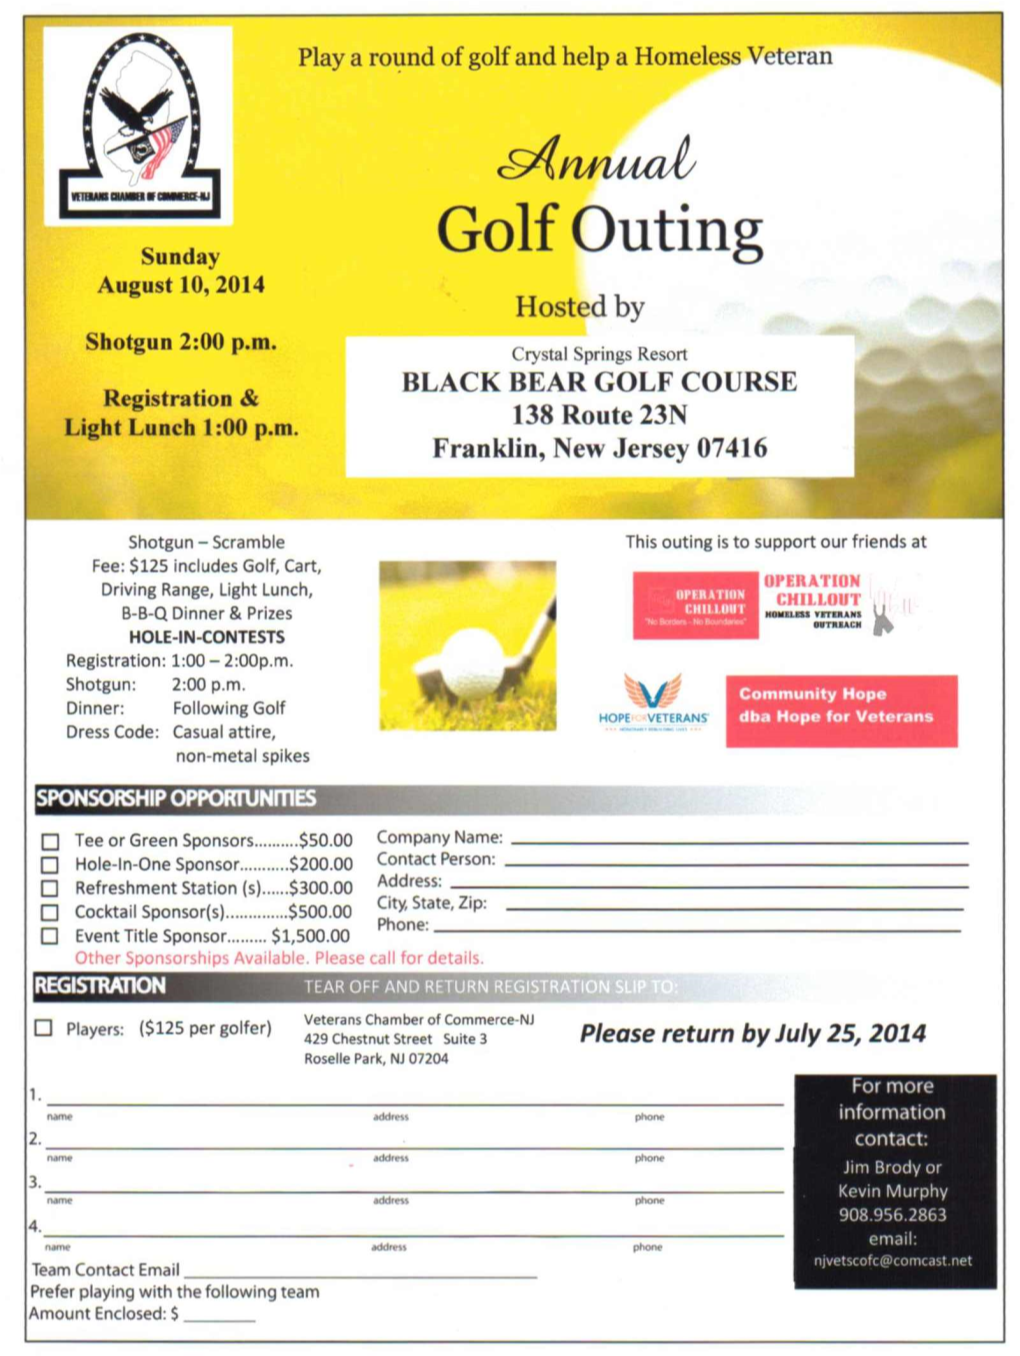 Golf Outing August 10,2014 Hosted by Shotgun 2:00 P.M